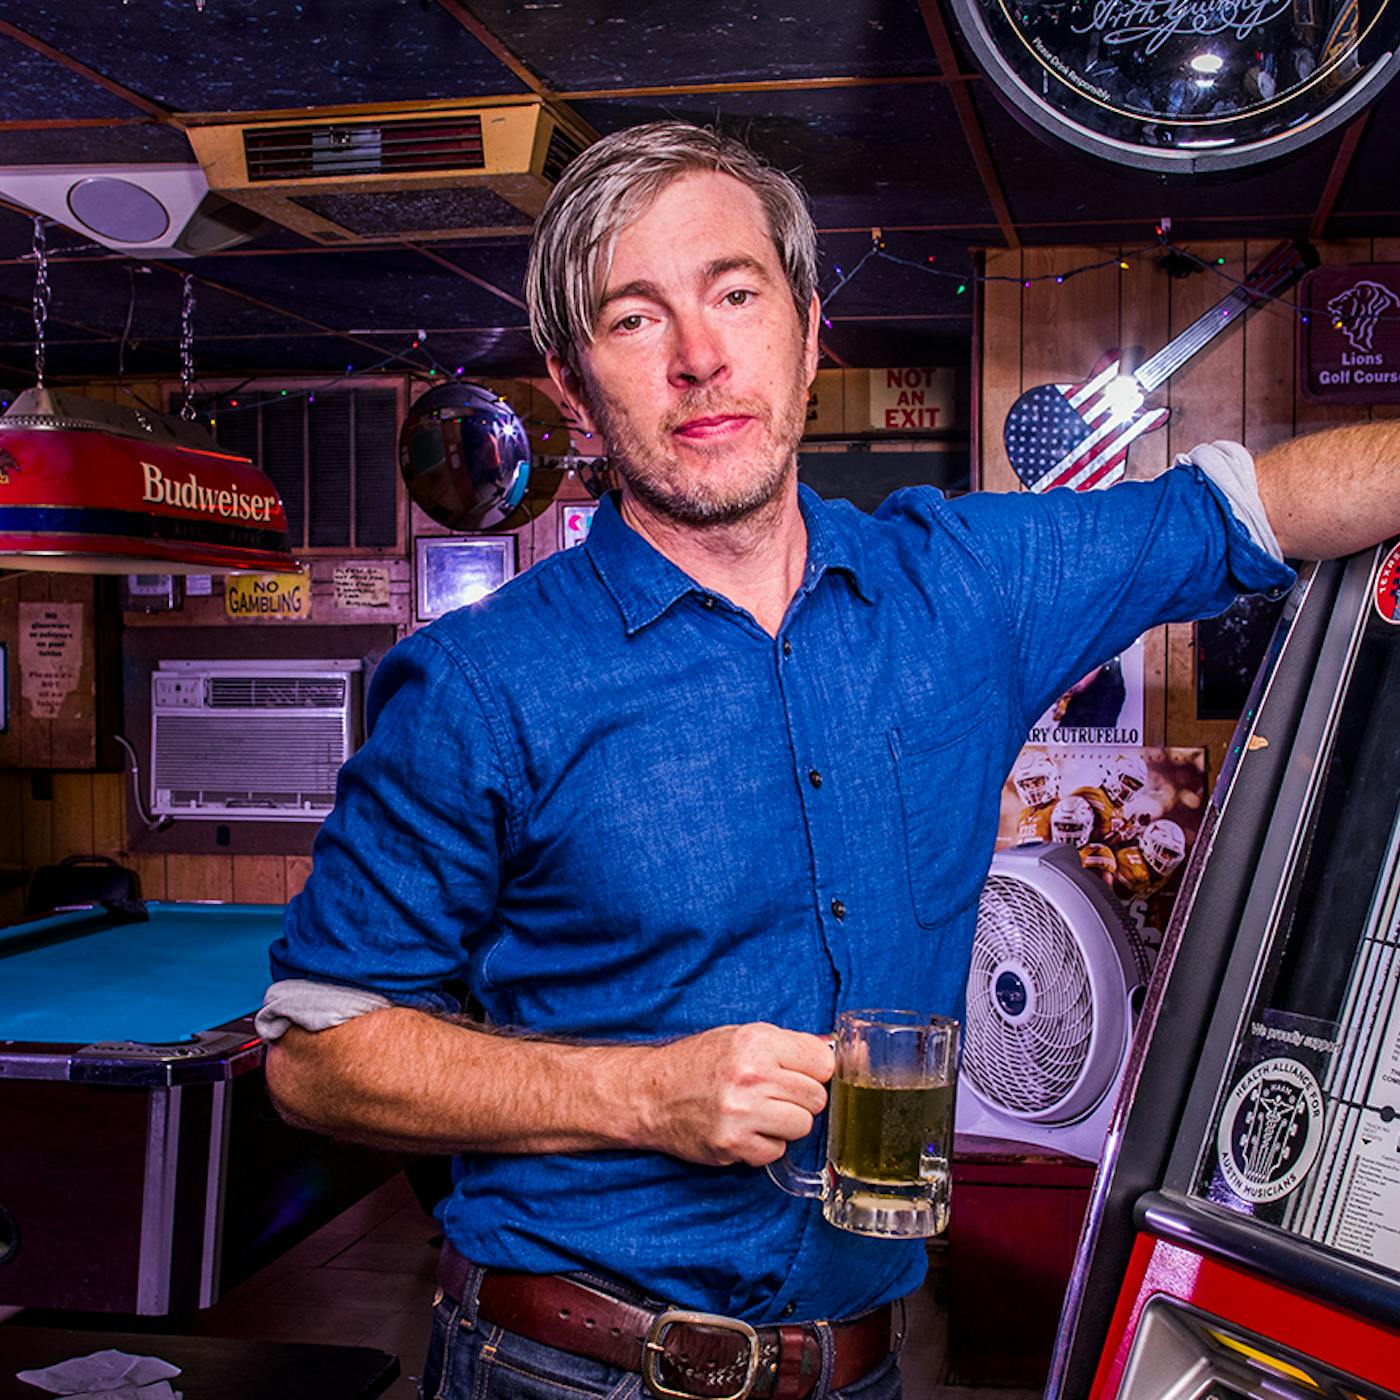 For Singer Bill Callahan, Home Is Where the Art Is – Texas Monthly